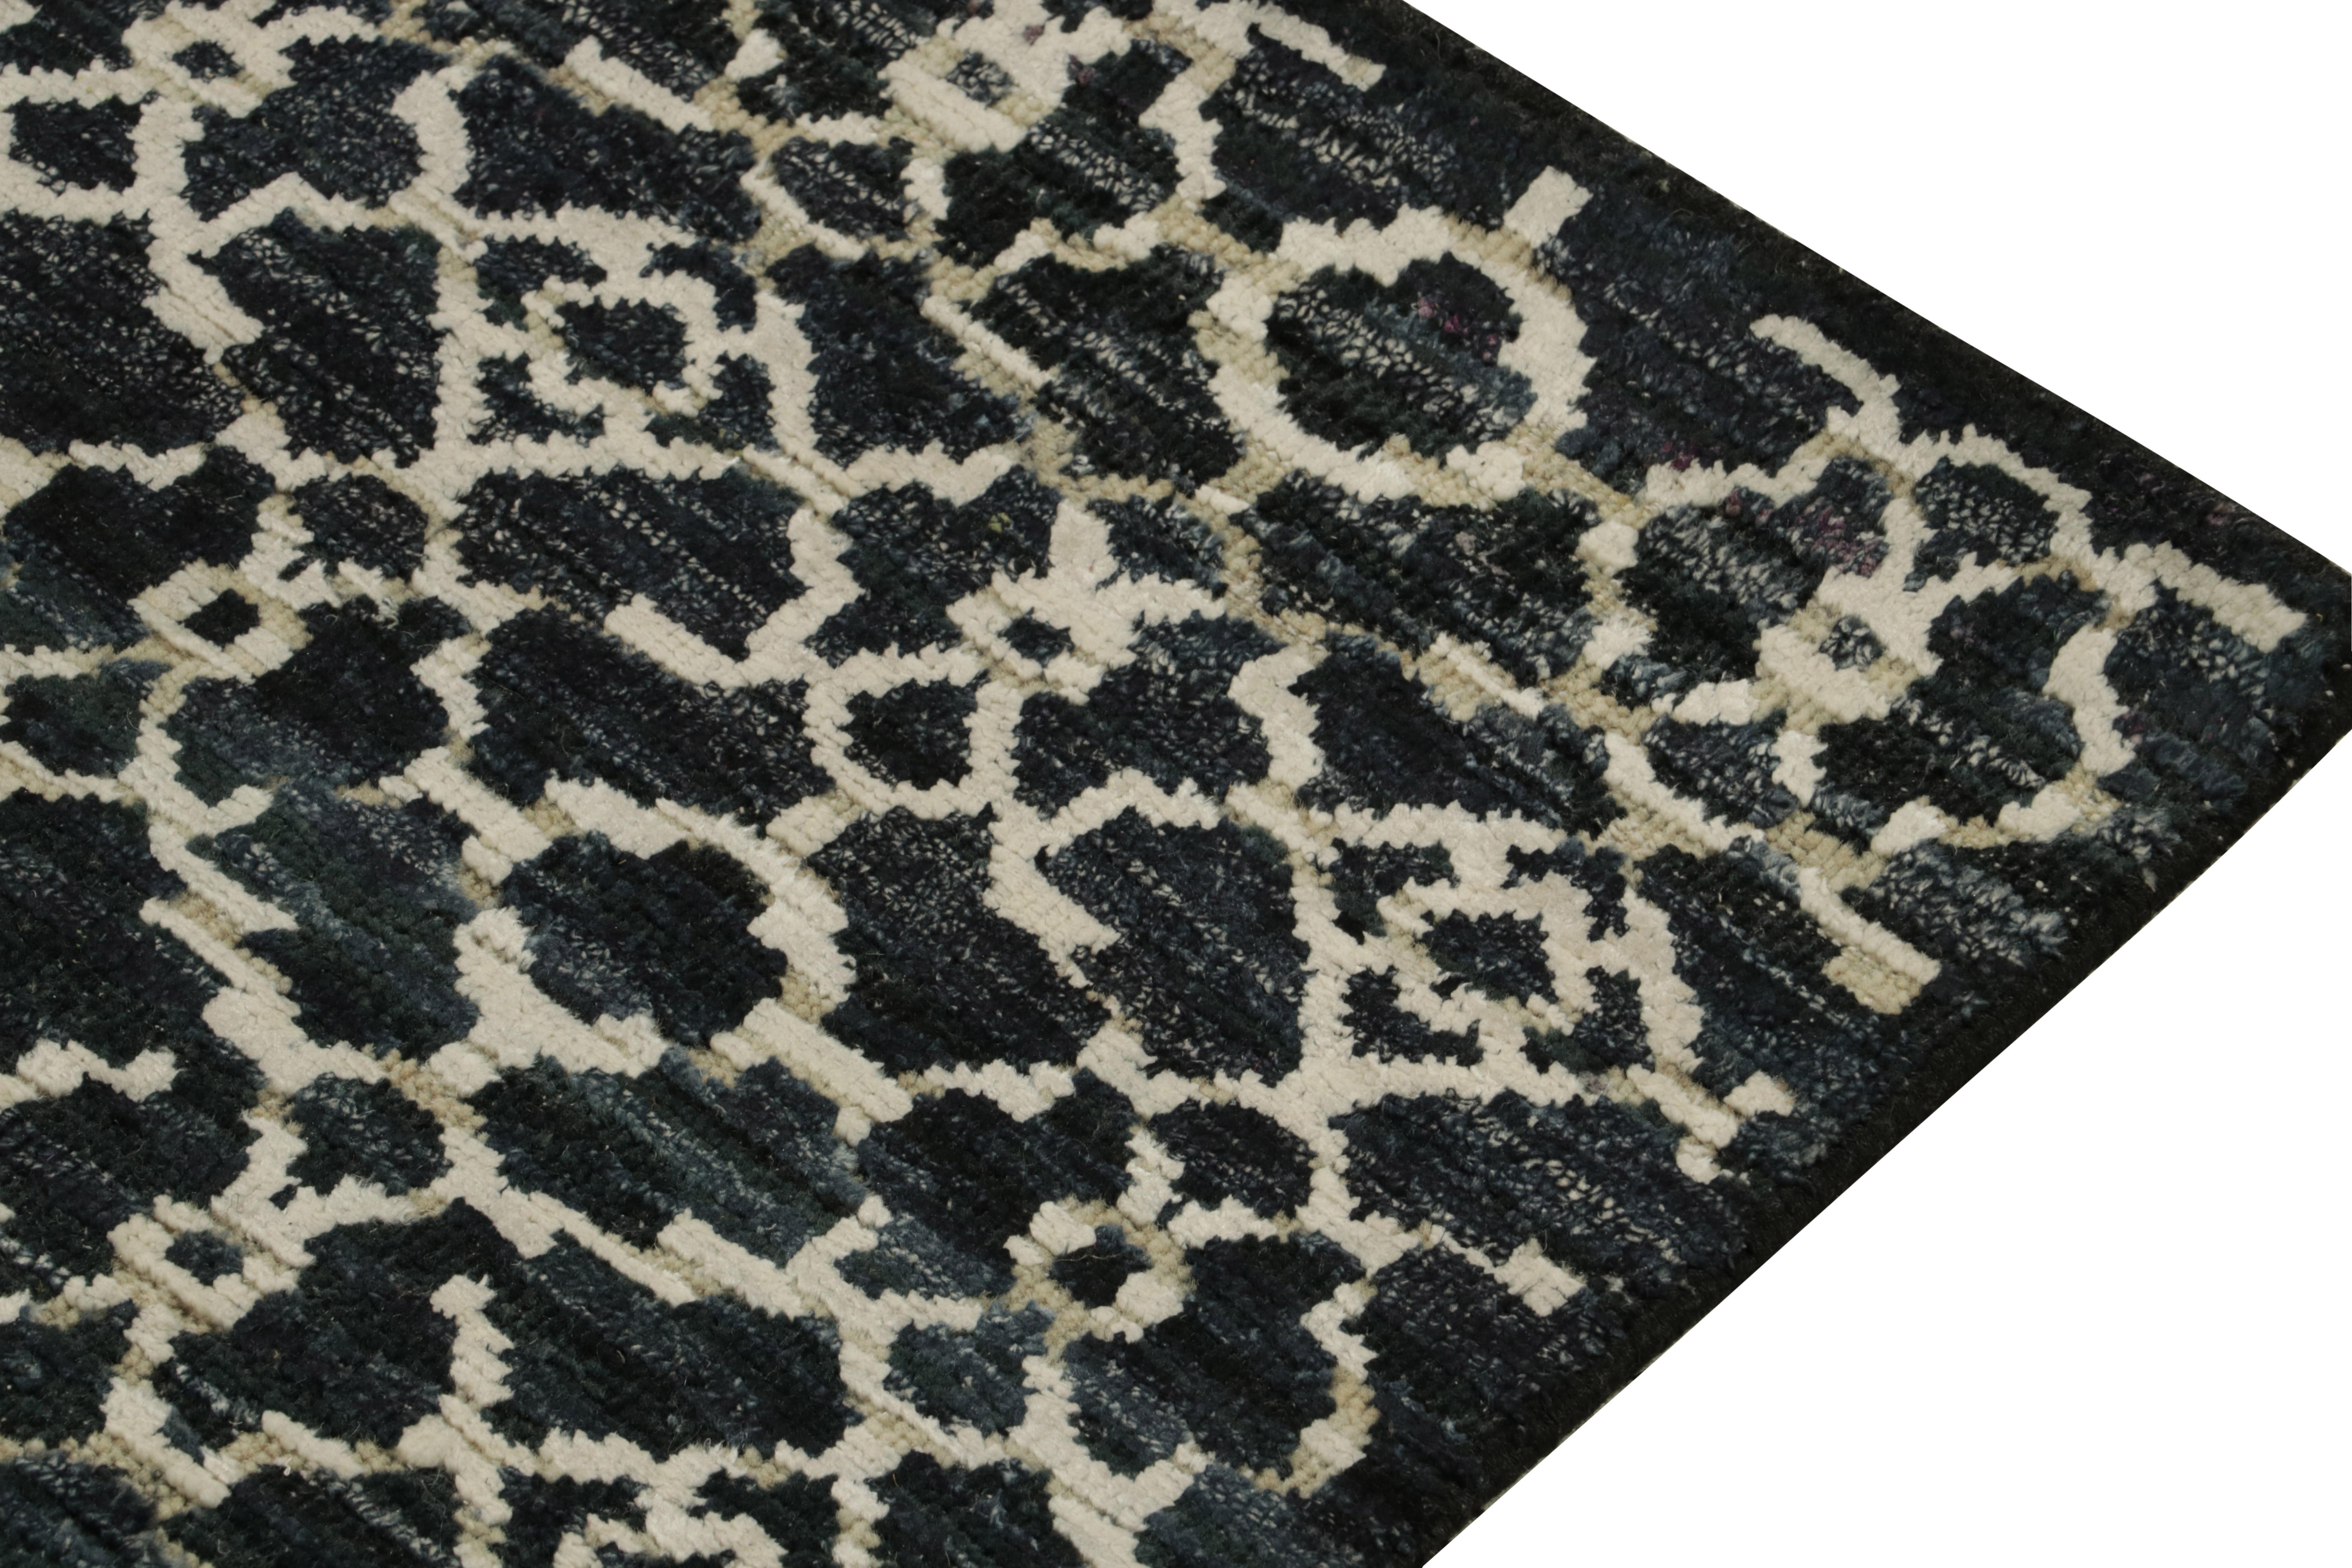 Hand-Knotted Rug & Kilim’s Contemporary runner in Black, Blue & White Trellis Patterns For Sale